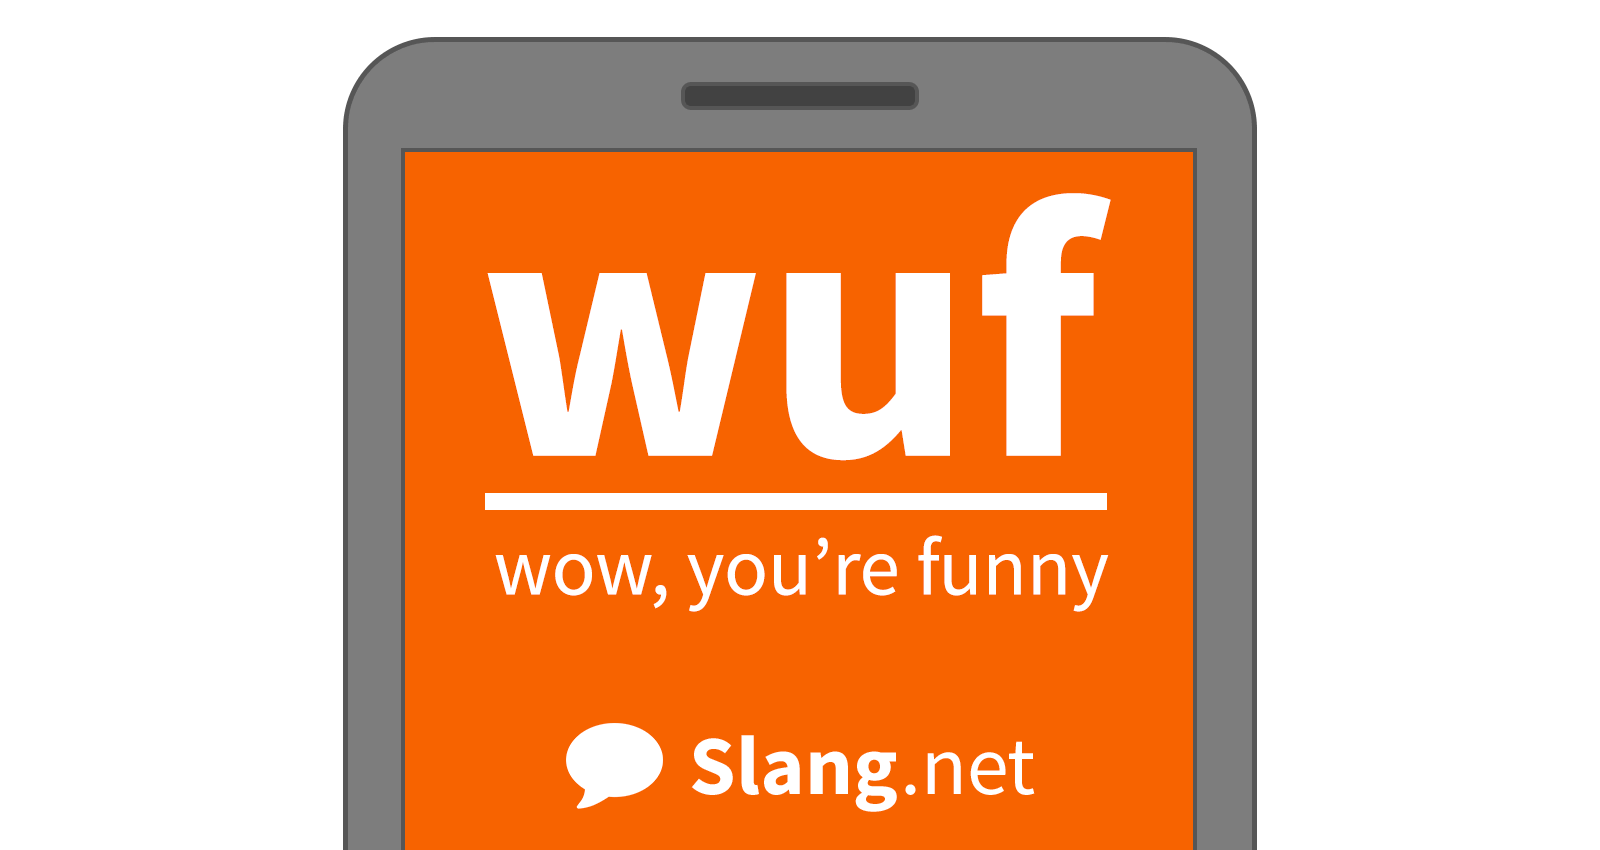 You will likely see wuf in messages